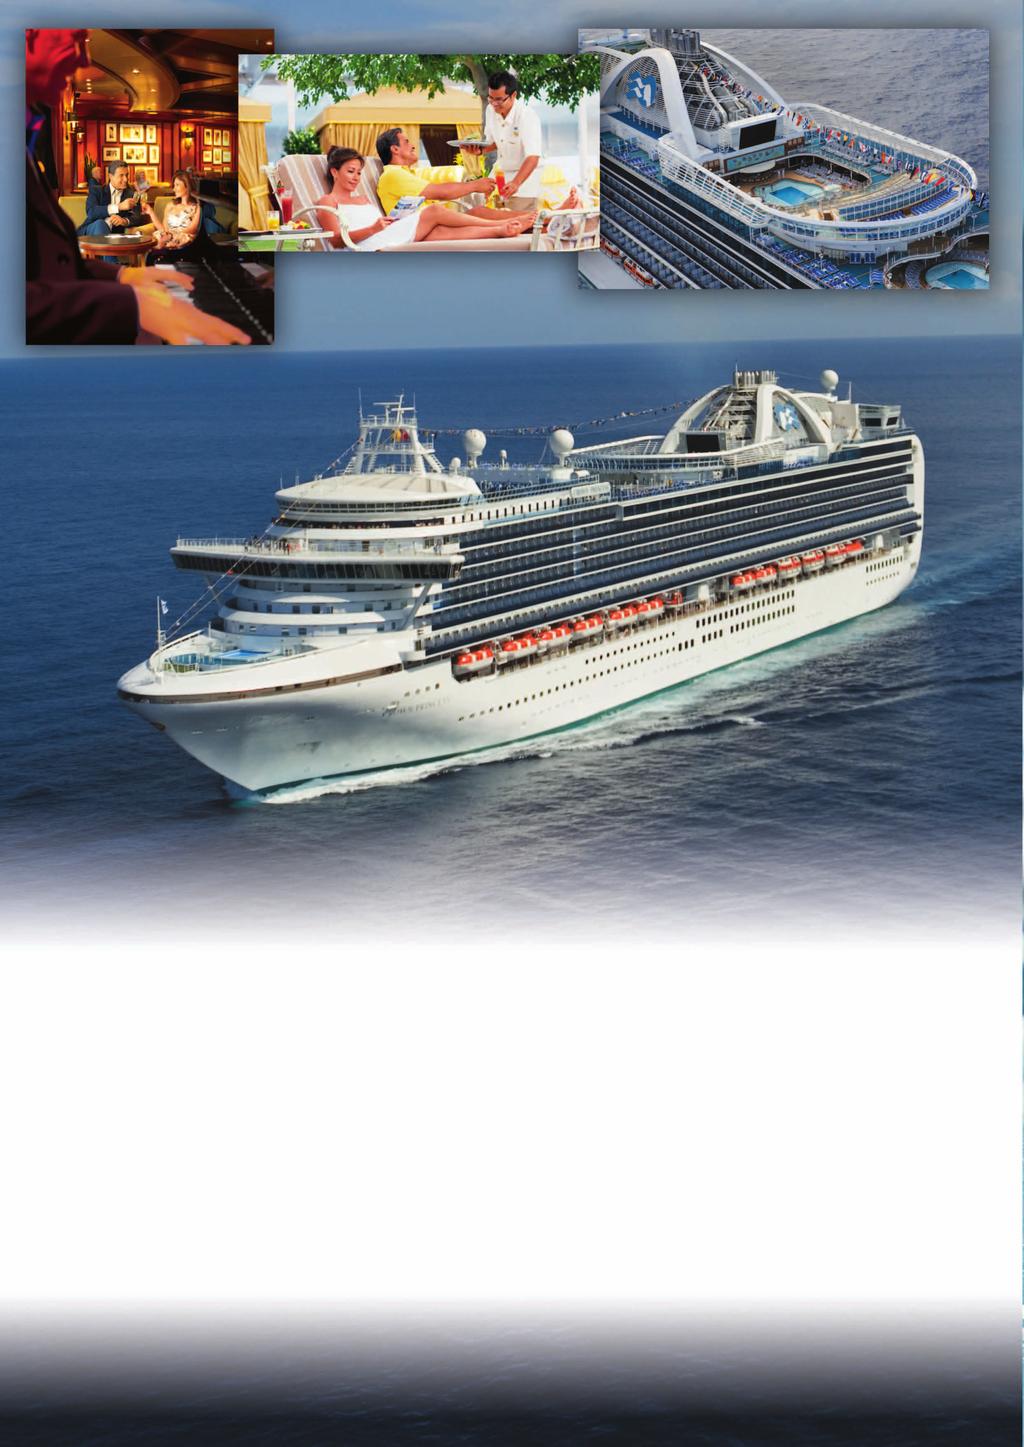 Crown Princess Escape Completely Featuring the very latest innovations, Crown Princess is one of the largest Princess ships. You will experience the relaxed comfort of many onboard venues.